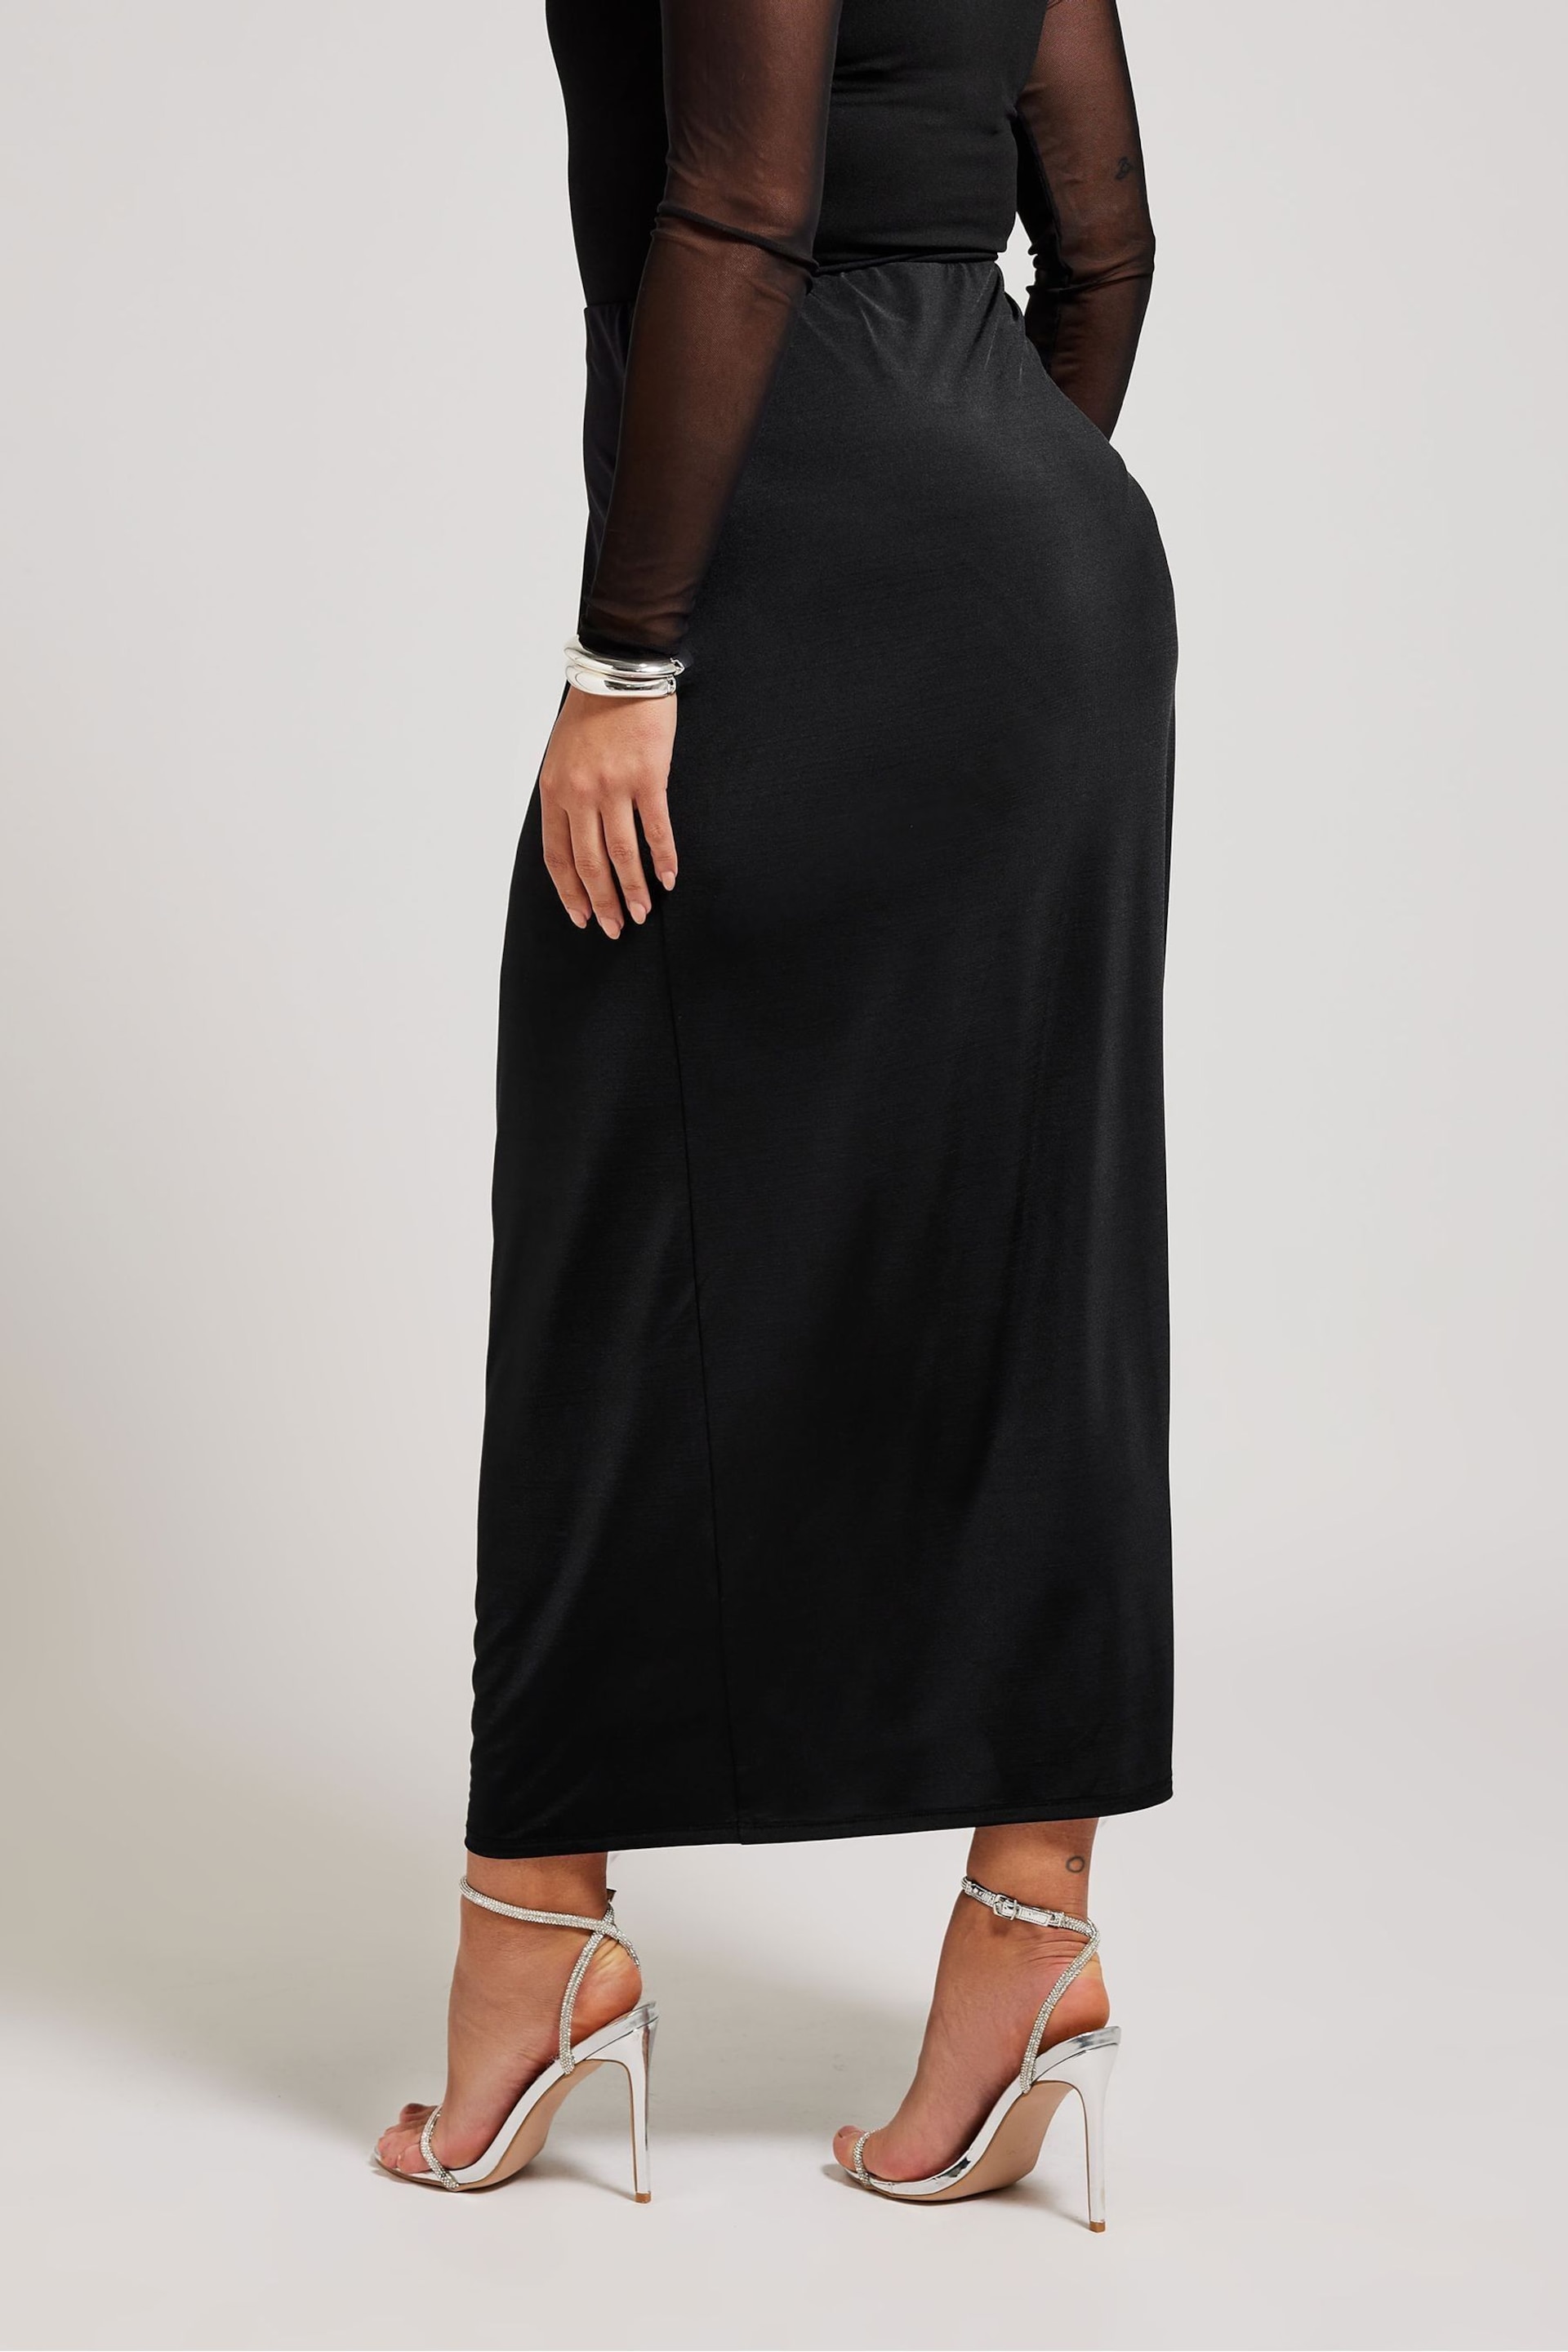 Yours Curve Black YOURS LONDON Curve Forest Green Slinky Maxi Skirt - Image 2 of 5